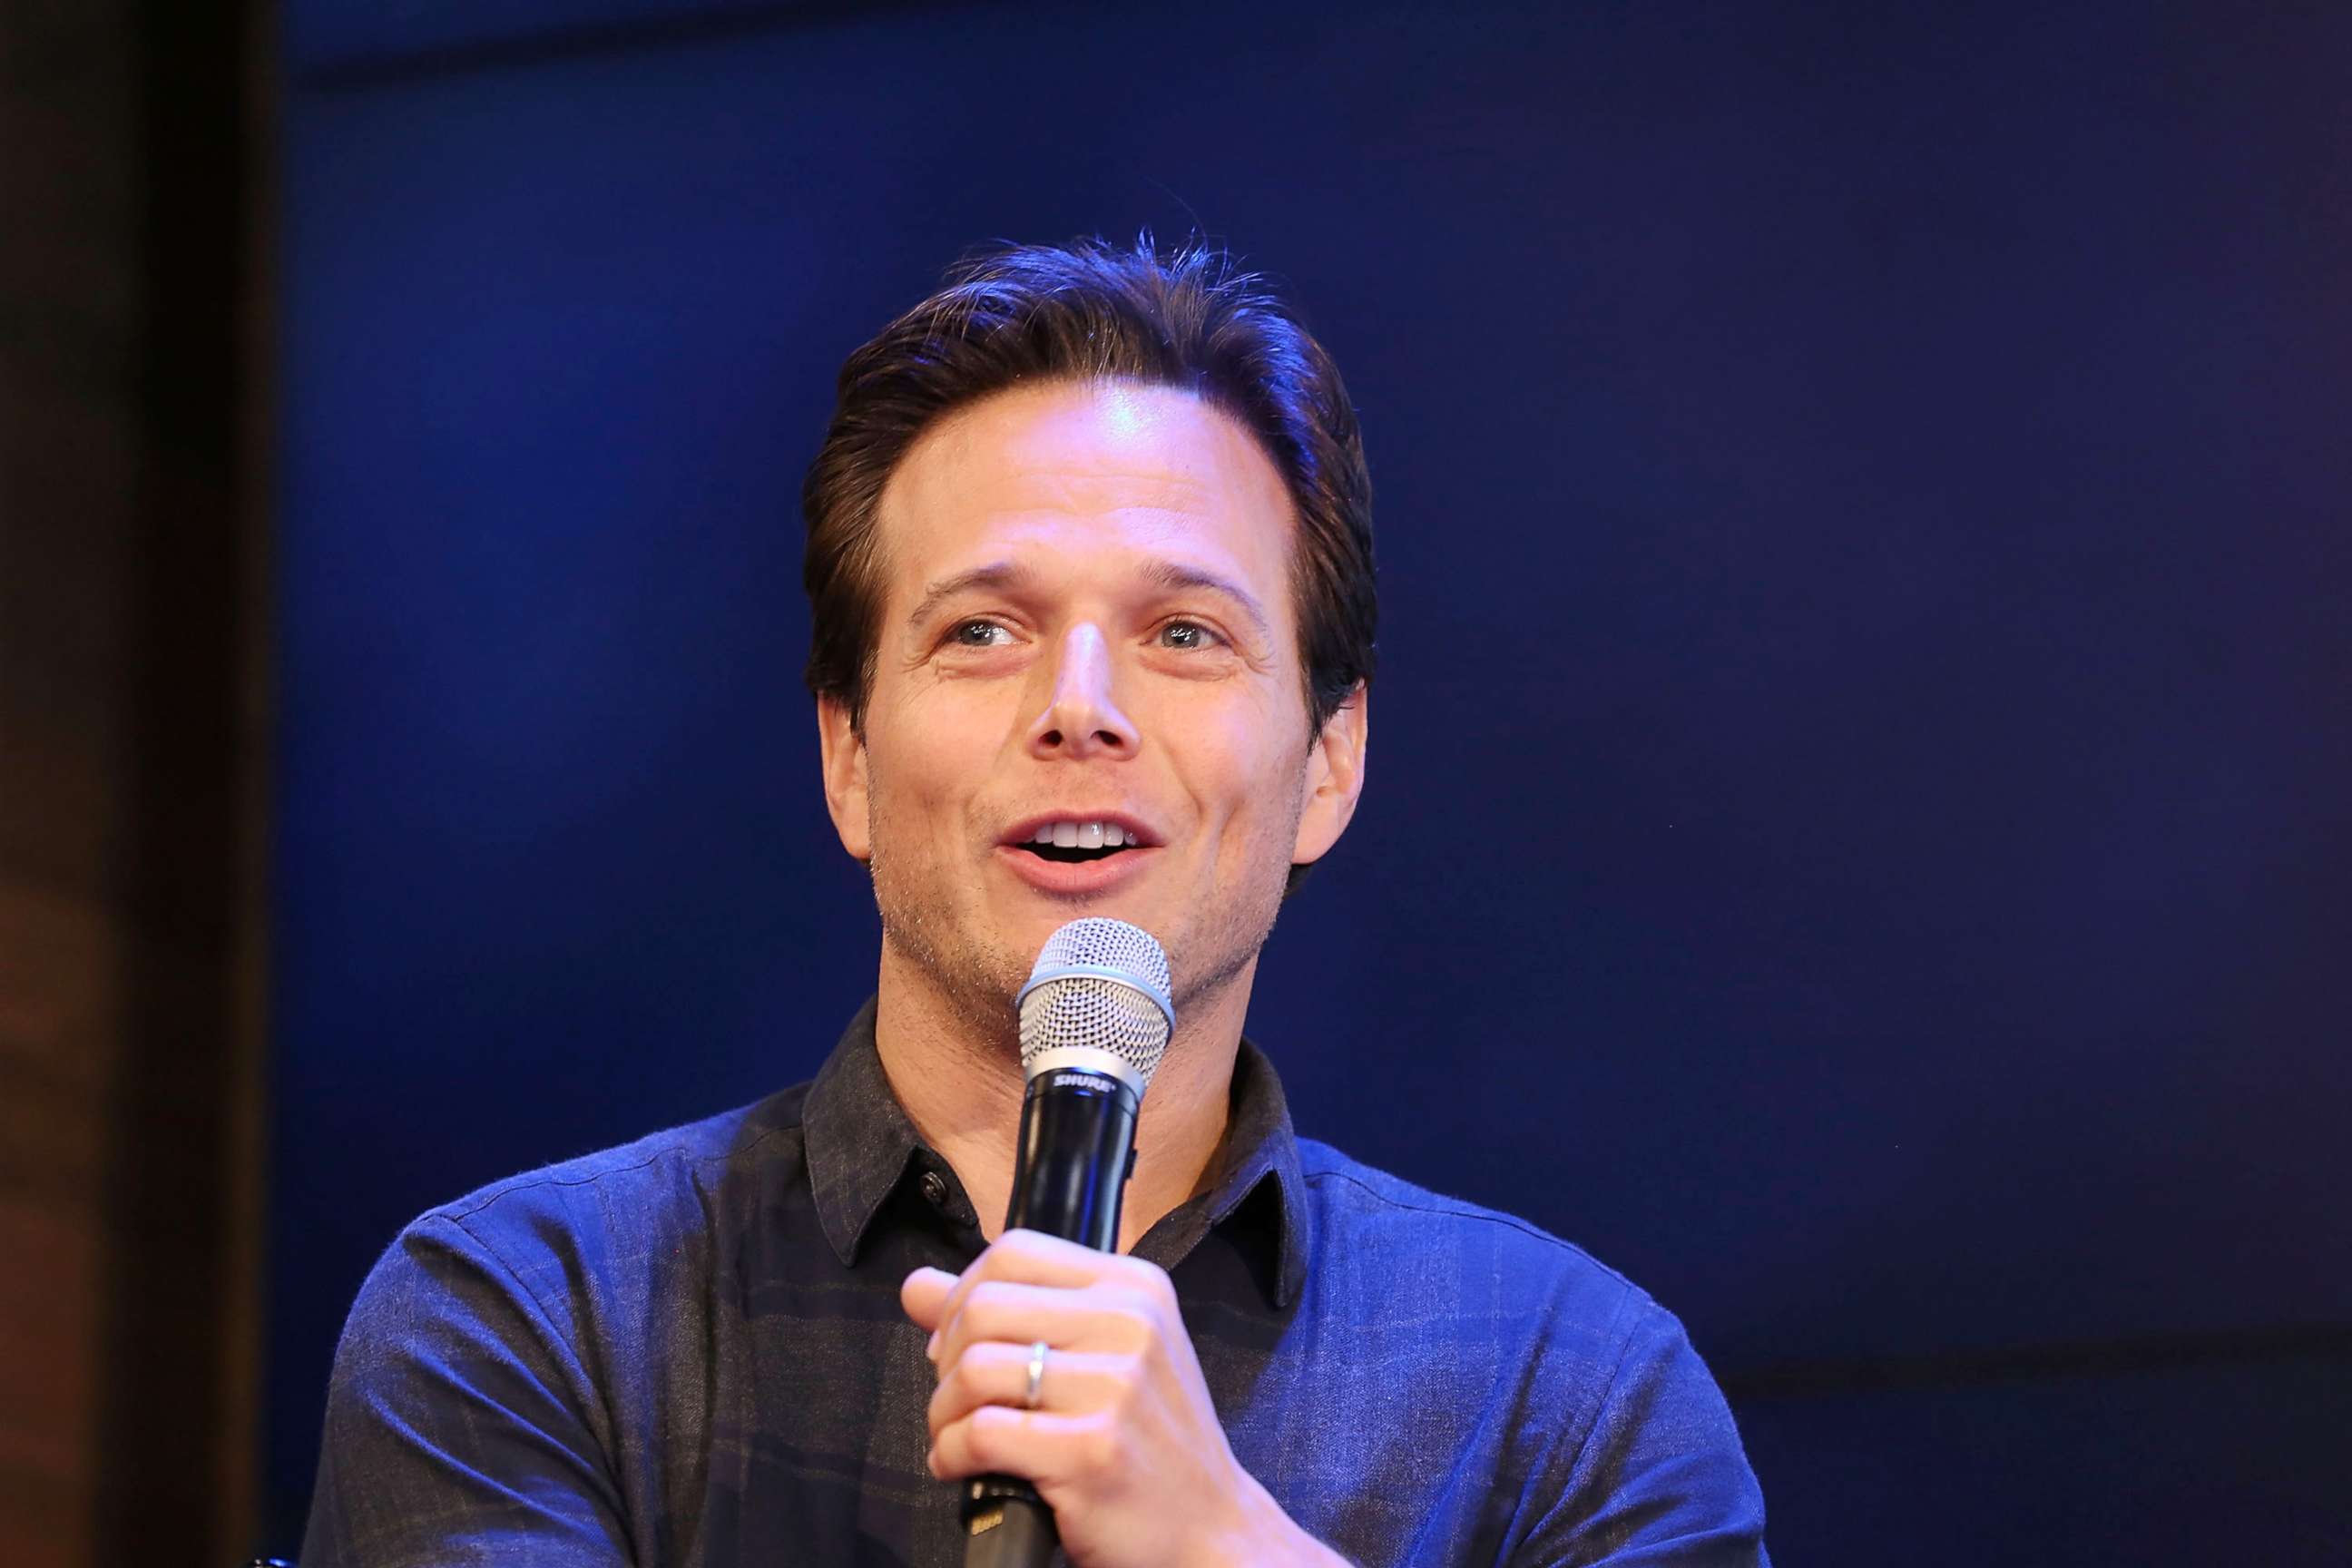 PHOTO: Scott Wolf attends Sony Pictures Television's Q&A on June 12, 2016, in Austin, Texas.